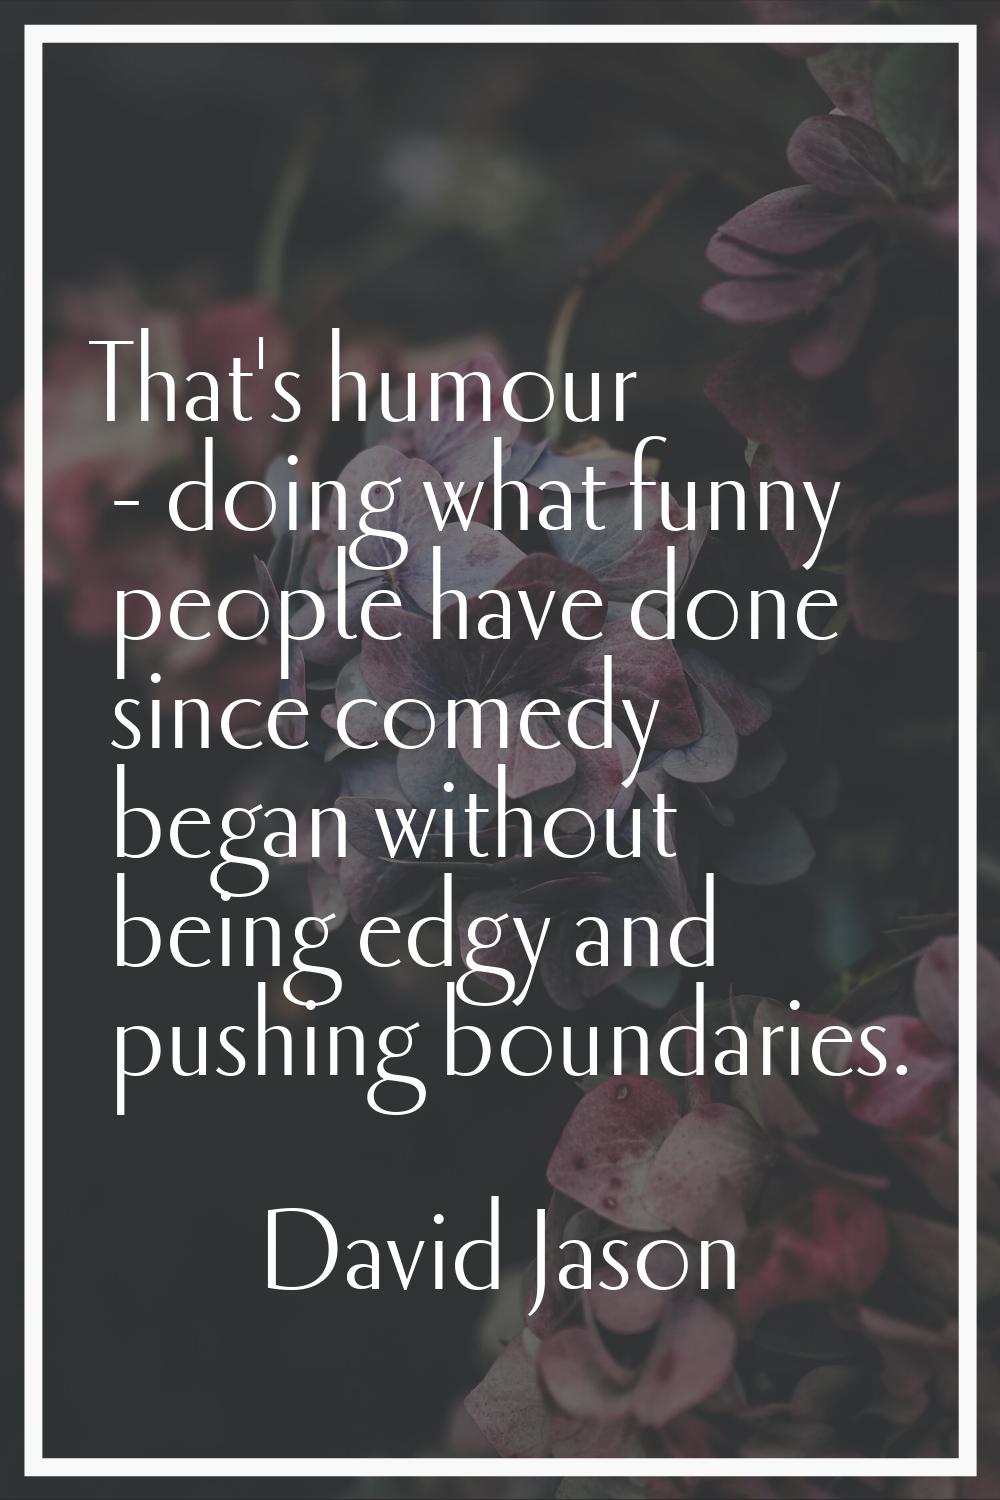 That's humour - doing what funny people have done since comedy began without being edgy and pushing